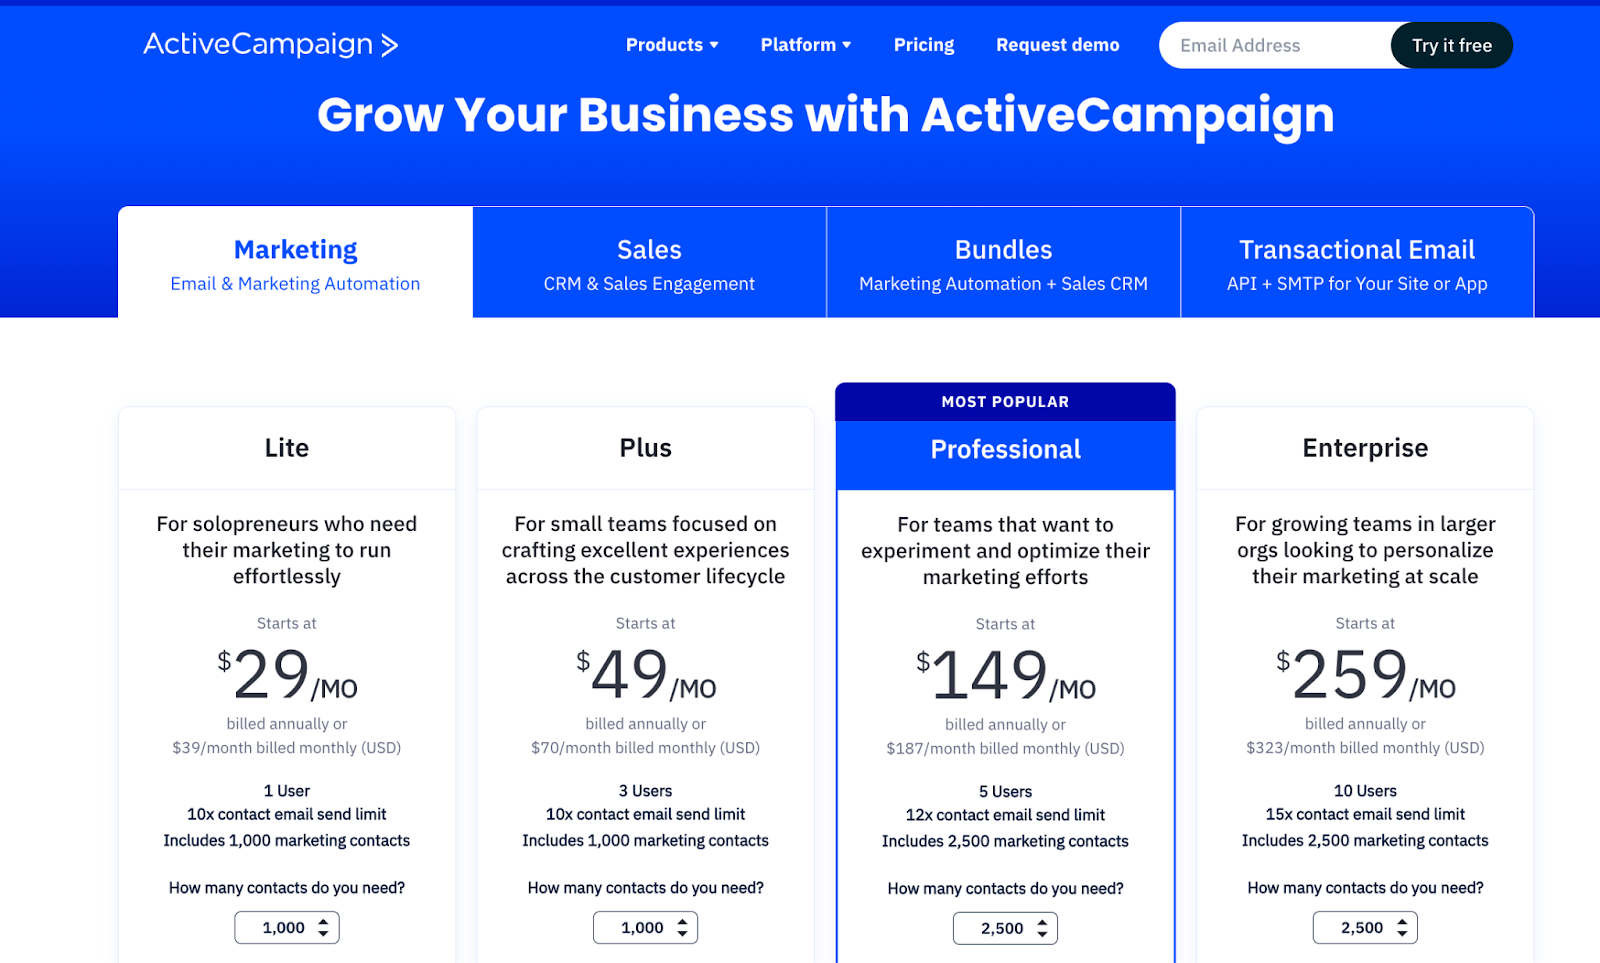 ActiveCampaign's pricing plans